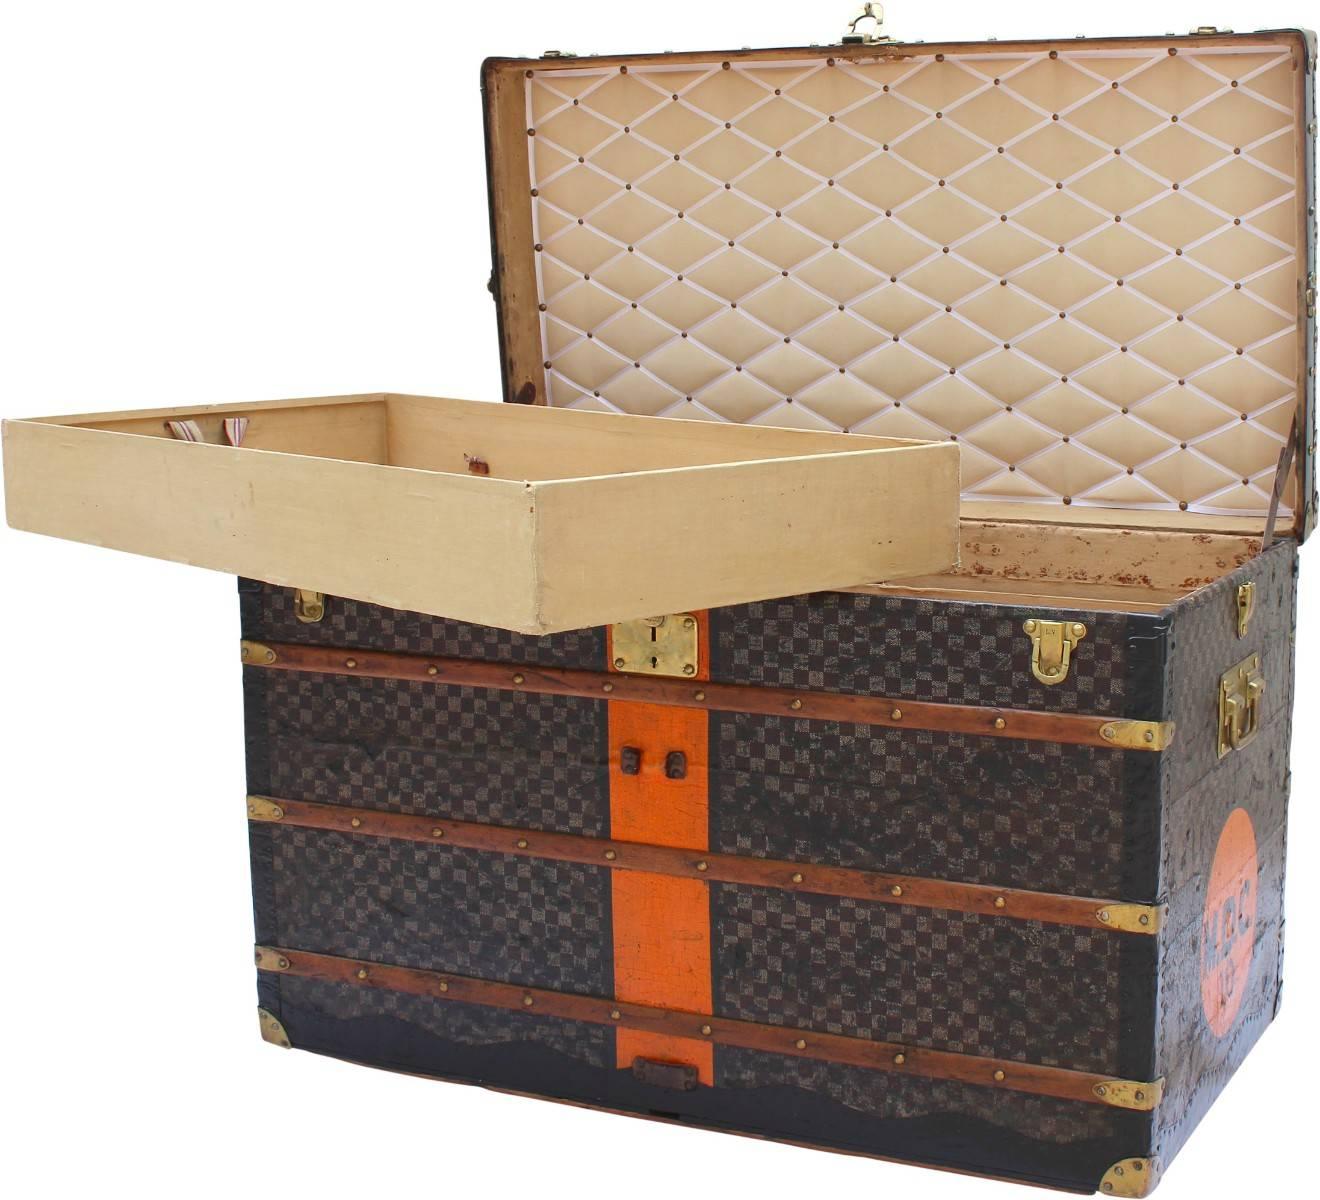 This large Louis Vuitton Damier trunk will make a bold statement in your home. Generally used as a coffee table or a blanket box at the end of a bed. With a distinctive orange stripe and MDC initials painted on the trunk alongside finishes such as